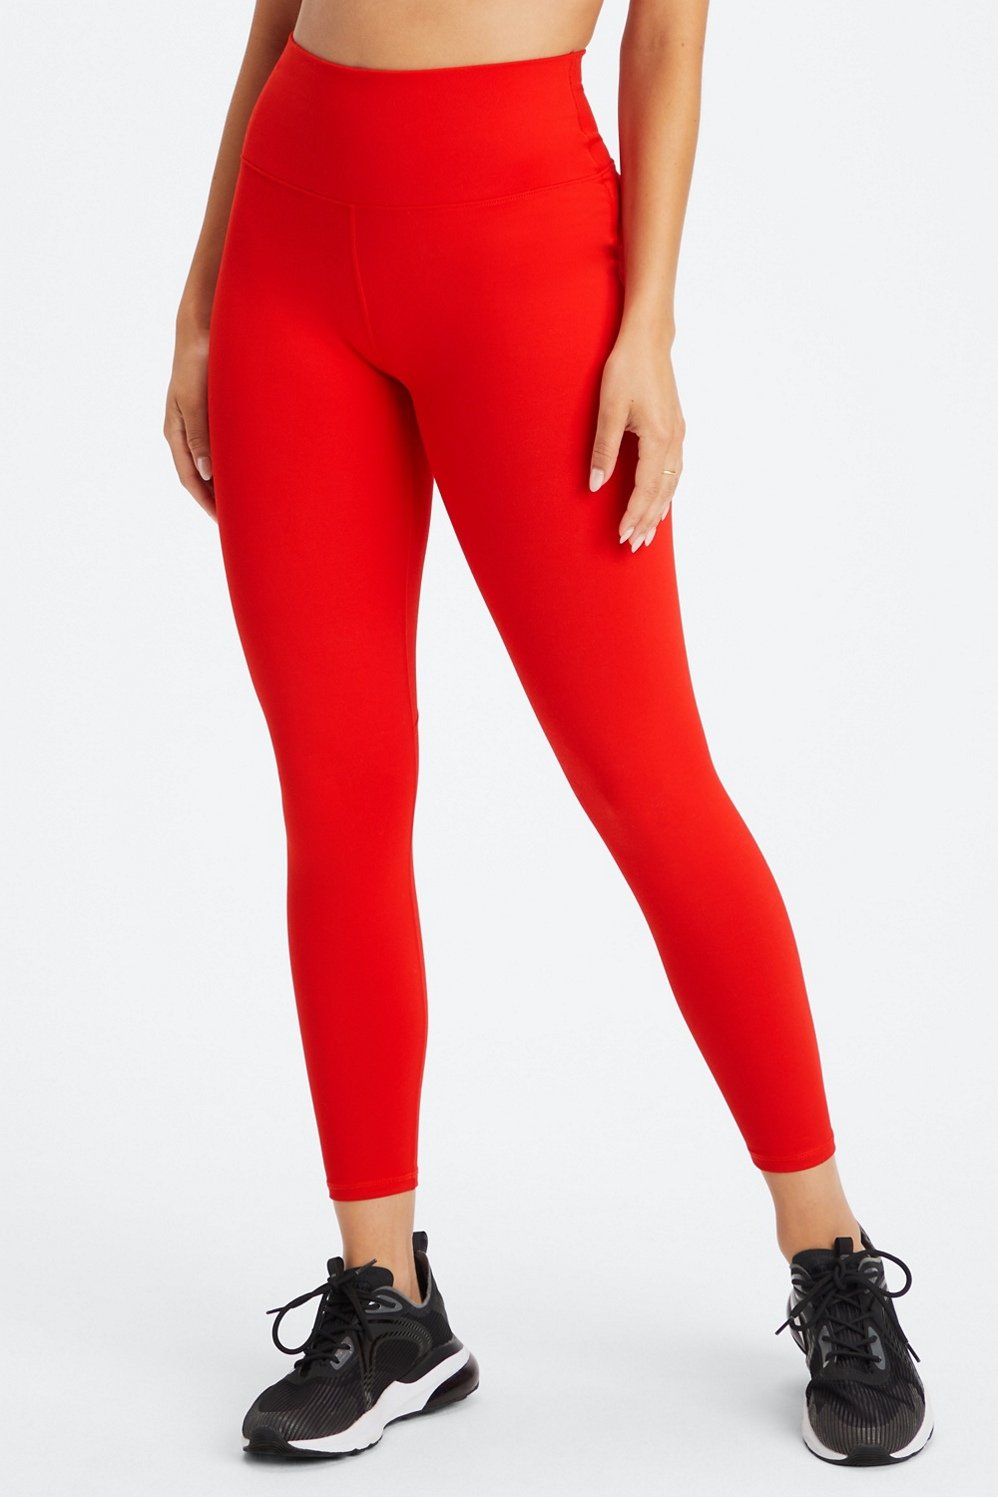 Fabletics Boost PowerHold Hot Pink Criss Cross Back High-Waisted 7/8  Legging XS - $30 - From Erin